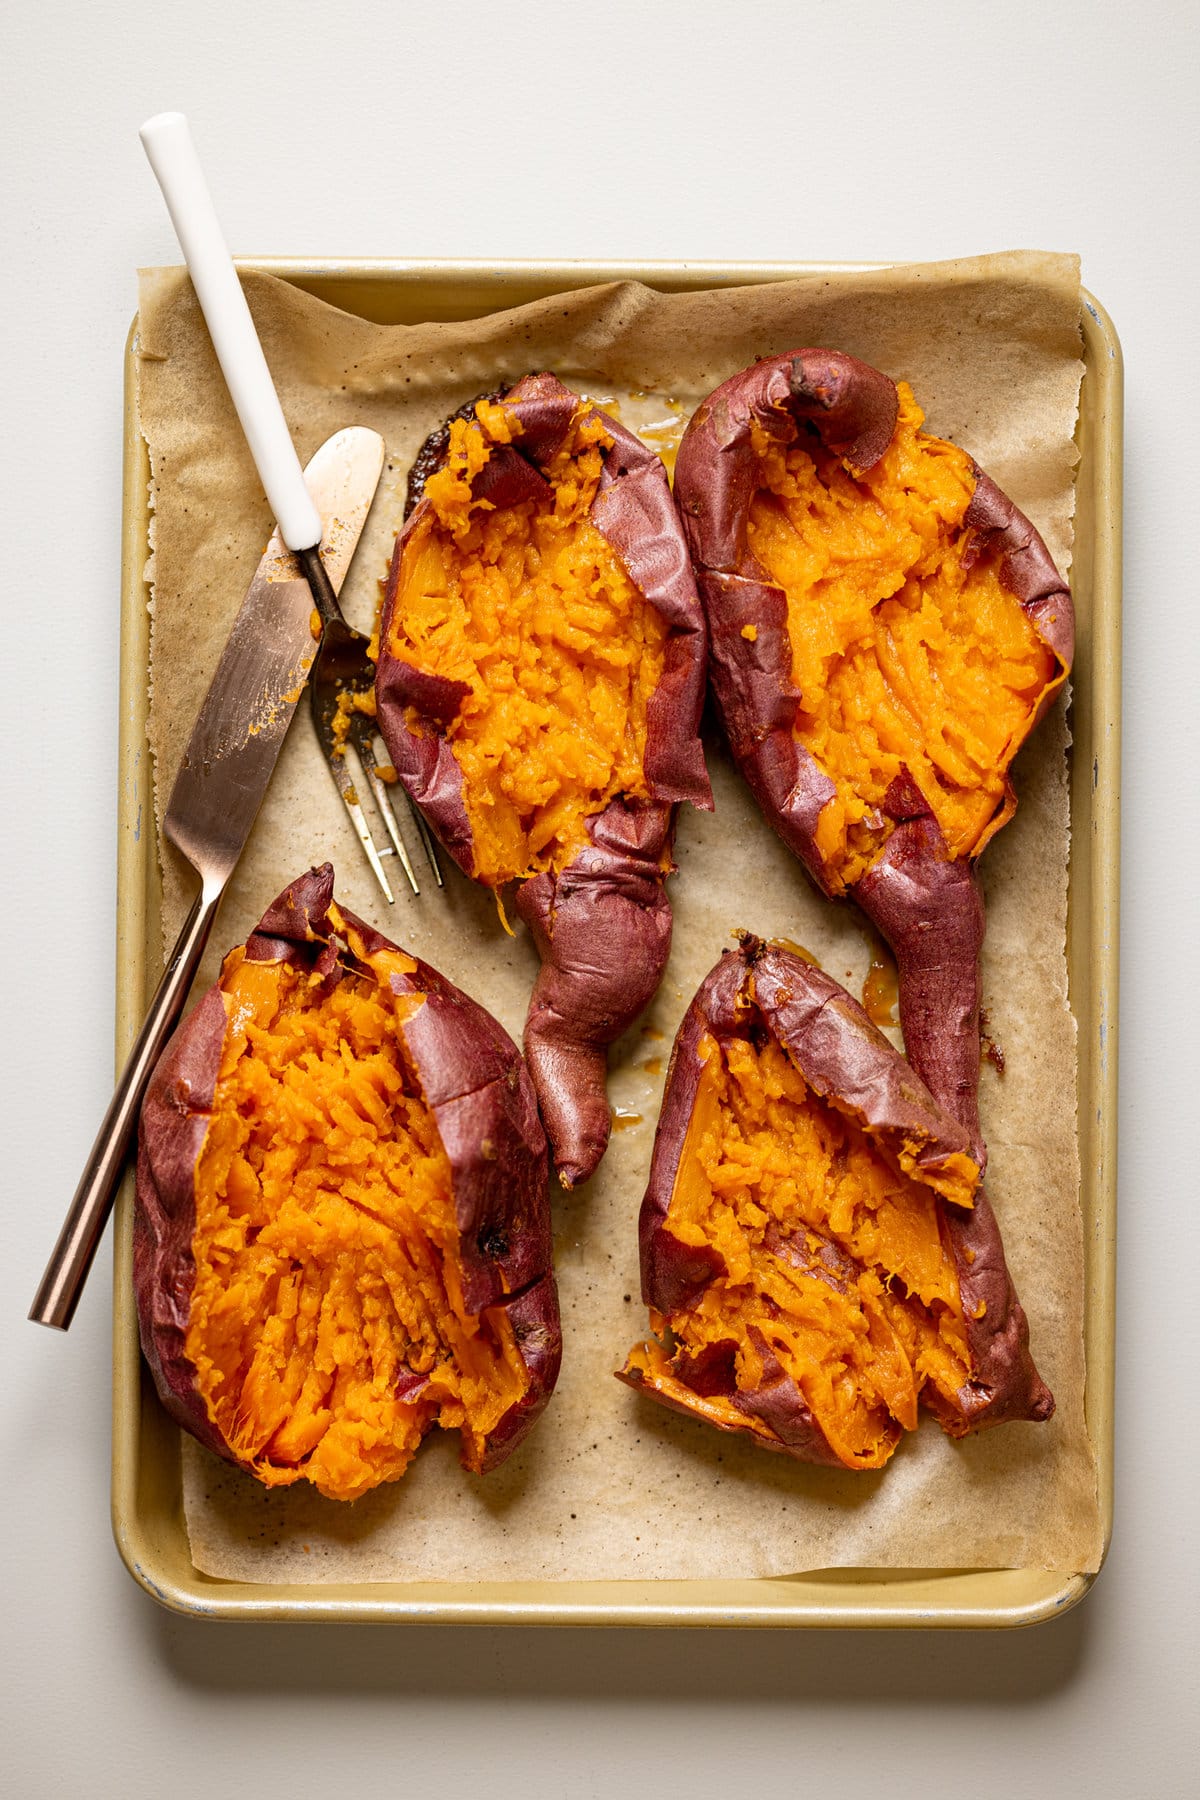 Roasted sweet potatoes cut open and mashed